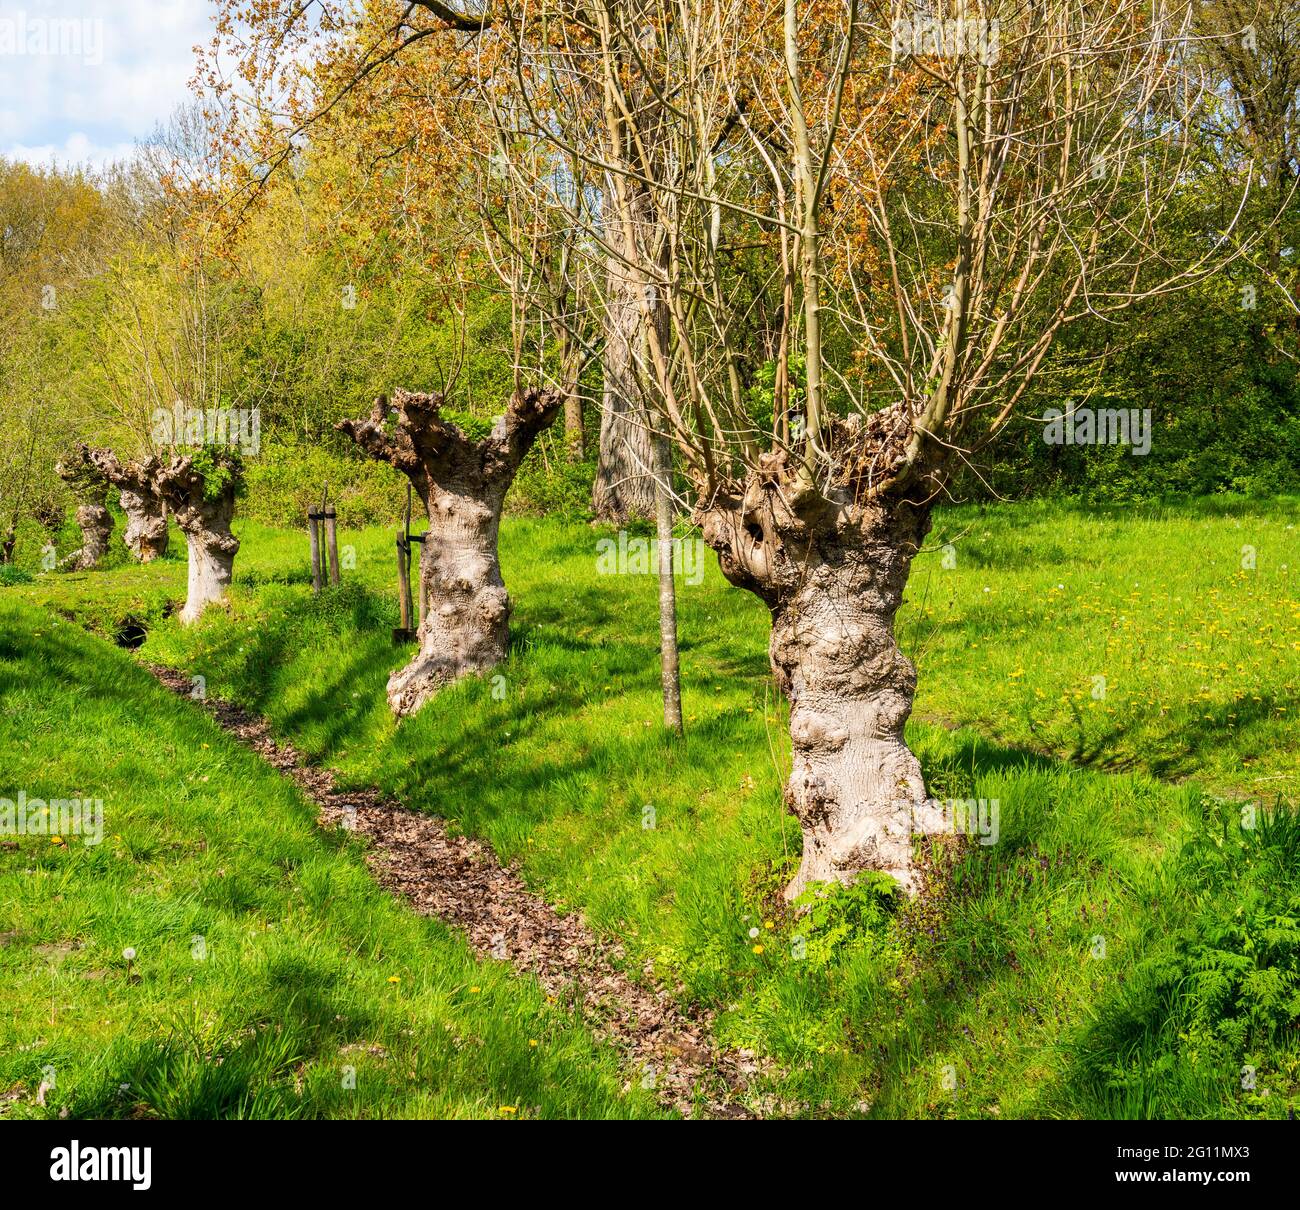 Group of pollarded European ash trees (Fraxinus excelsior) Stock Photo